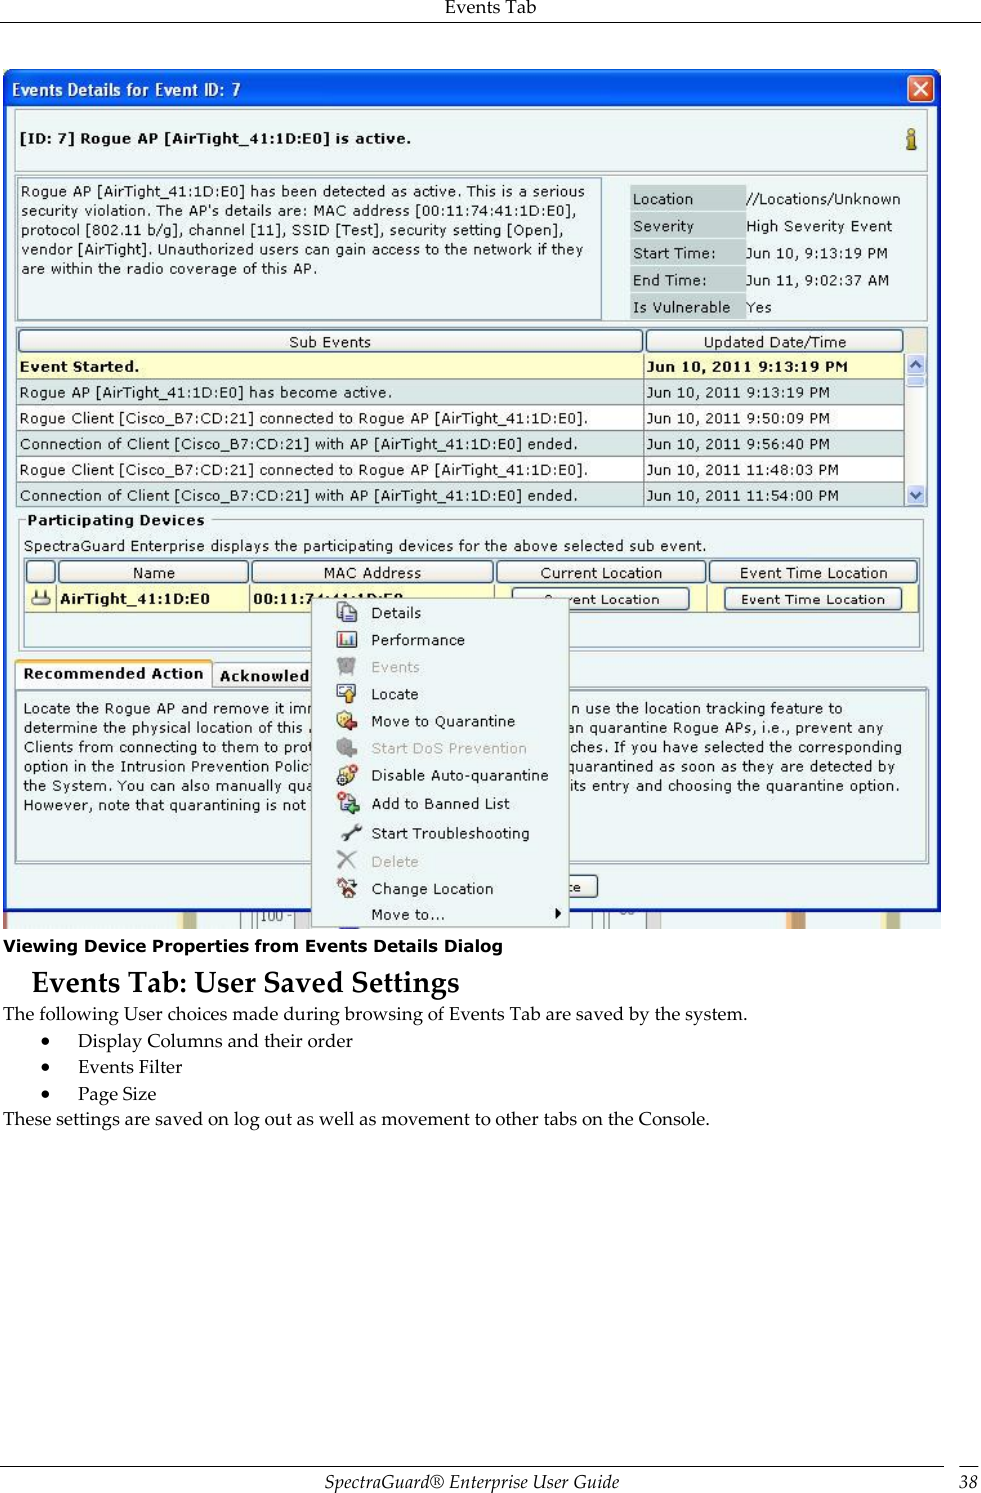 Events Tab SpectraGuard®  Enterprise User Guide 38  Viewing Device Properties from Events Details Dialog Events Tab: User Saved Settings The following User choices made during browsing of Events Tab are saved by the system.  Display Columns and their order  Events Filter  Page Size These settings are saved on log out as well as movement to other tabs on the Console. 